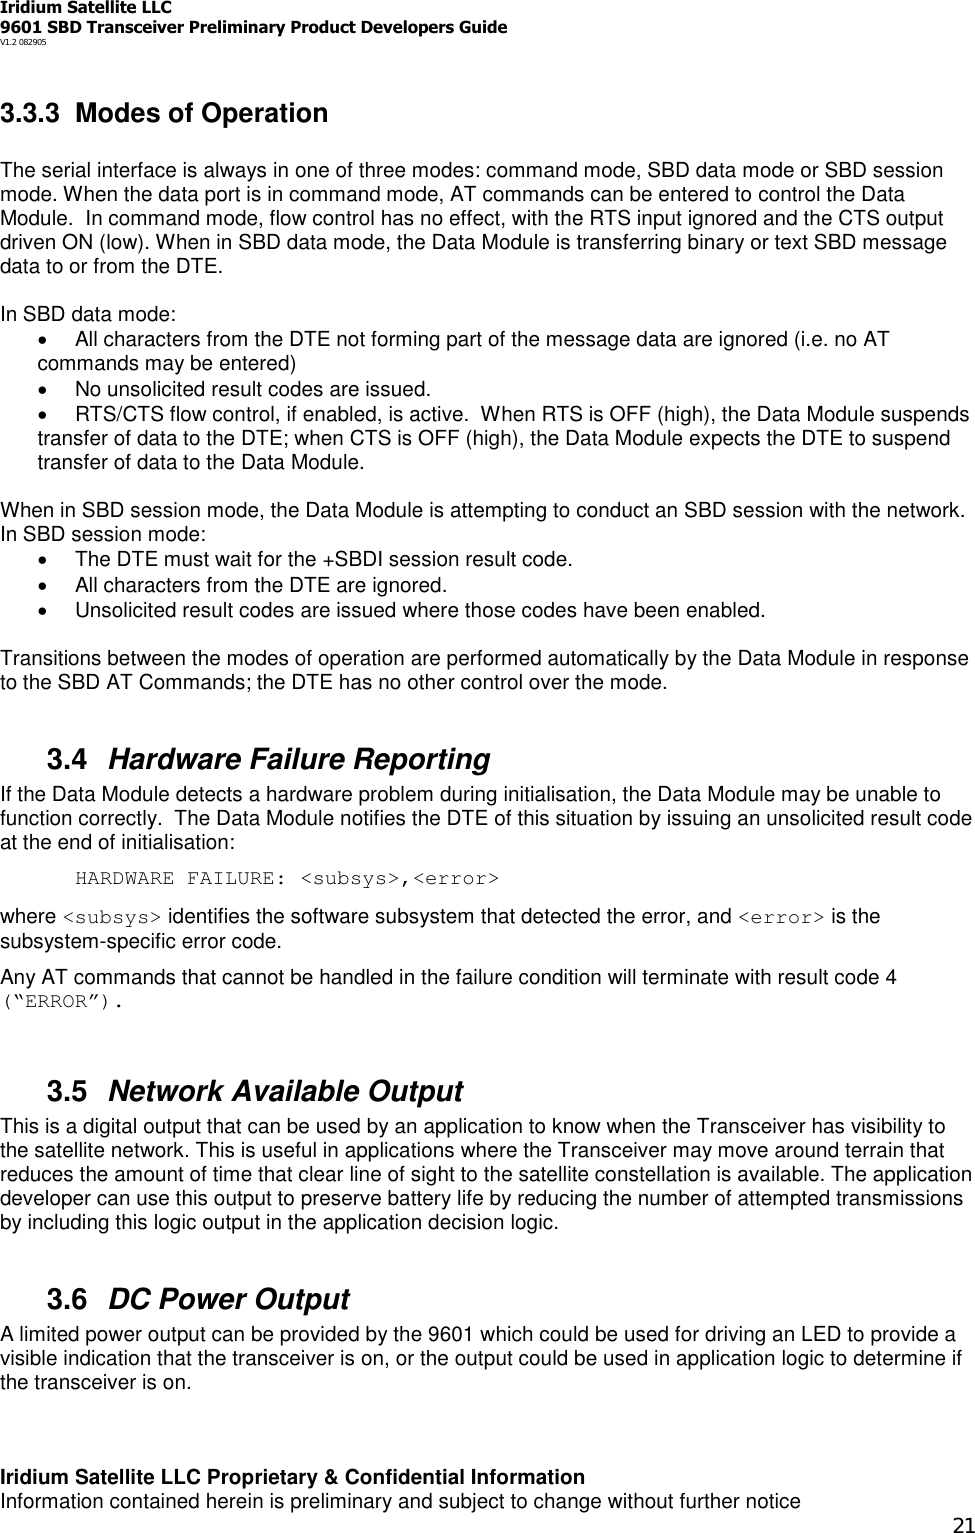 Iridium Satellite LLC9601 SBD Transceiver Preliminary Product Developers GuideV1.2 082905Iridium Satellite LLC Proprietary &amp; Confidential InformationInformation contained herein is preliminary and subject to change without further notice213.3.3 Modes of OperationThe serial interface is always in one of three modes: command mode, SBD data mode or SBD sessionmode. When the data port is in command mode, AT commands can be entered to control the DataModule. In command mode, flow control has no effect, with the RTS input ignored and the CTS outputdriven ON (low). When in SBD data mode, the Data Module is transferring binary or text SBD messagedata to or from the DTE.In SBD data mode:All characters from the DTE not forming part of the message data are ignored (i.e. no ATcommands may be entered)No unsolicited result codes are issued.RTS/CTS flow control, if enabled, is active. When RTS is OFF (high), the Data Module suspendstransfer of data to the DTE; when CTS is OFF (high), the Data Module expects the DTE to suspendtransfer of data to the Data Module.When in SBD session mode, the Data Module is attempting to conduct an SBD session with the network.In SBD session mode:The DTE must wait for the +SBDI session result code.All characters from the DTE are ignored.Unsolicited result codes are issued where those codes have been enabled.Transitions between the modes of operation are performed automatically by the Data Module in responseto the SBD AT Commands; the DTE has no other control over the mode.3.4 Hardware Failure ReportingIf the Data Module detects a hardware problem during initialisation, the Data Module may be unable tofunction correctly. The Data Module notifies the DTE of this situation by issuing an unsolicited result codeat the end of initialisation:HARDWARE FAILURE: &lt;subsys&gt;,&lt;error&gt;where &lt;subsys&gt; identifies the software subsystem that detected the error, and &lt;error&gt; is thesubsystem-specific error code.Any AT commands that cannot be handled in the failure condition will terminate with result code 4(“ERROR”).3.5 Network Available OutputThis is a digital output that can be used by an application to know when the Transceiver has visibility tothe satellite network. This is useful in applications where the Transceiver may move around terrain thatreduces the amount of time that clear line of sight to the satellite constellation is available. The applicationdeveloper can use this output to preserve battery life by reducing the number of attempted transmissionsby including this logic output in the application decision logic.3.6 DC Power OutputA limited power output can be provided by the 9601 which could be used for driving an LED to provide avisible indication that the transceiver is on, or the output could be used in application logic to determine ifthe transceiver is on.